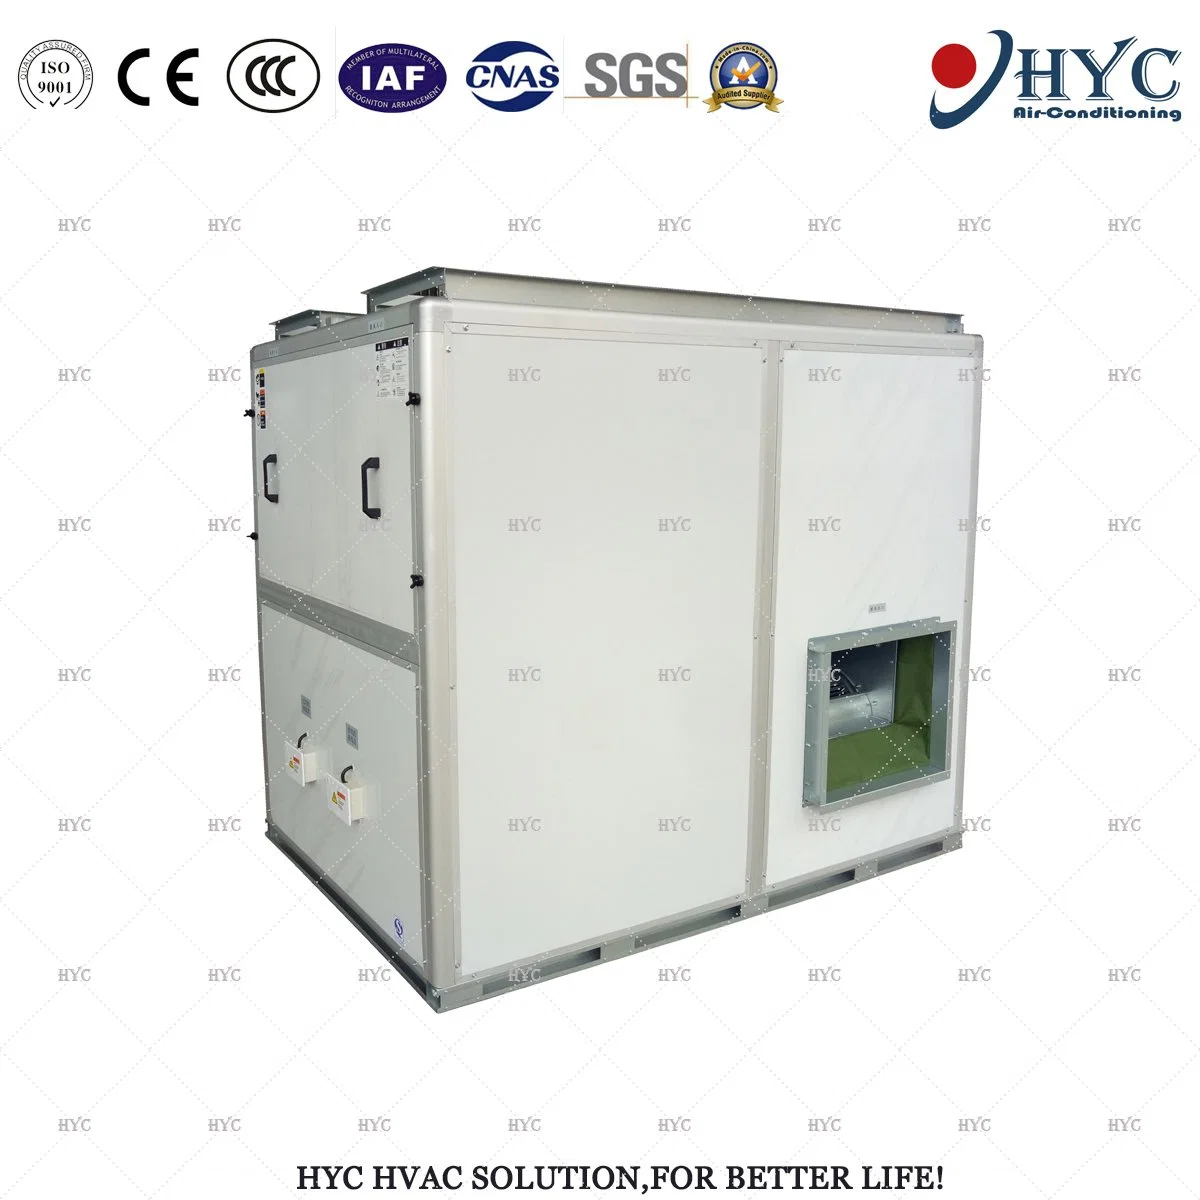 Central Air Conditioner Cooling System /Ahu/Air Handler/HVAC